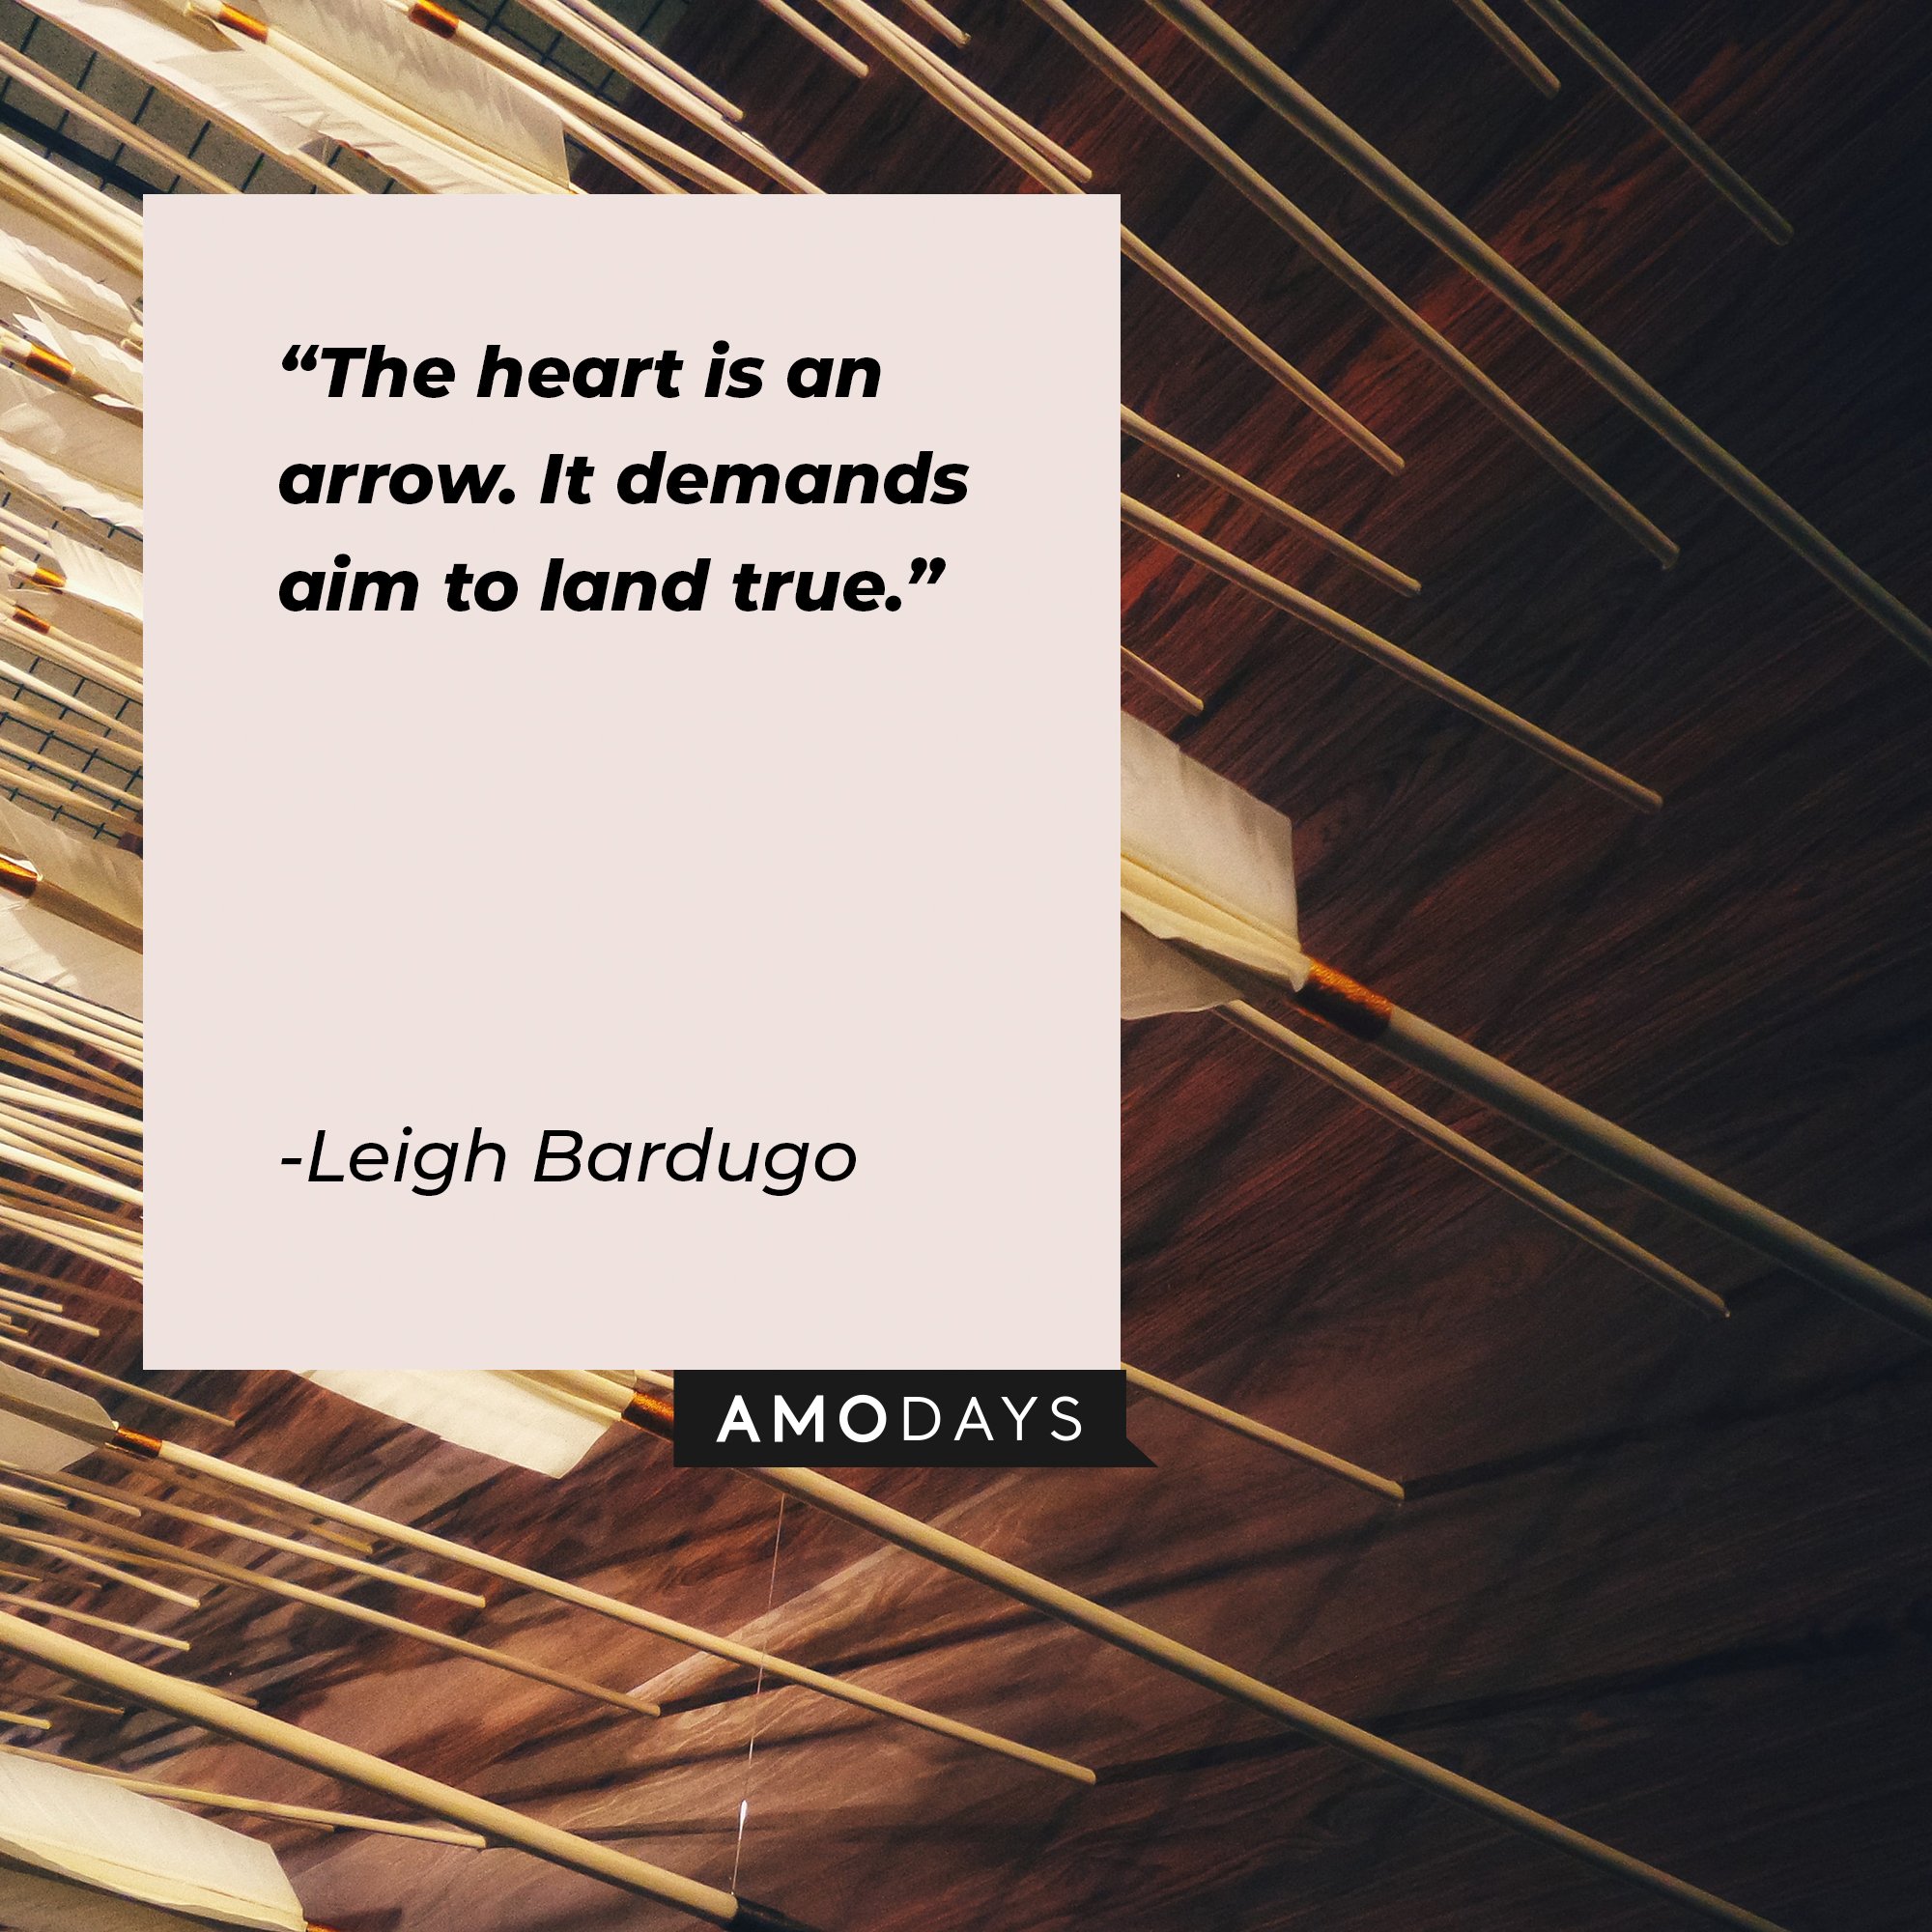 Leigh Bardugo’s quote: "The heart is an arrow. It demands aim to land true." | Image: AmoDays